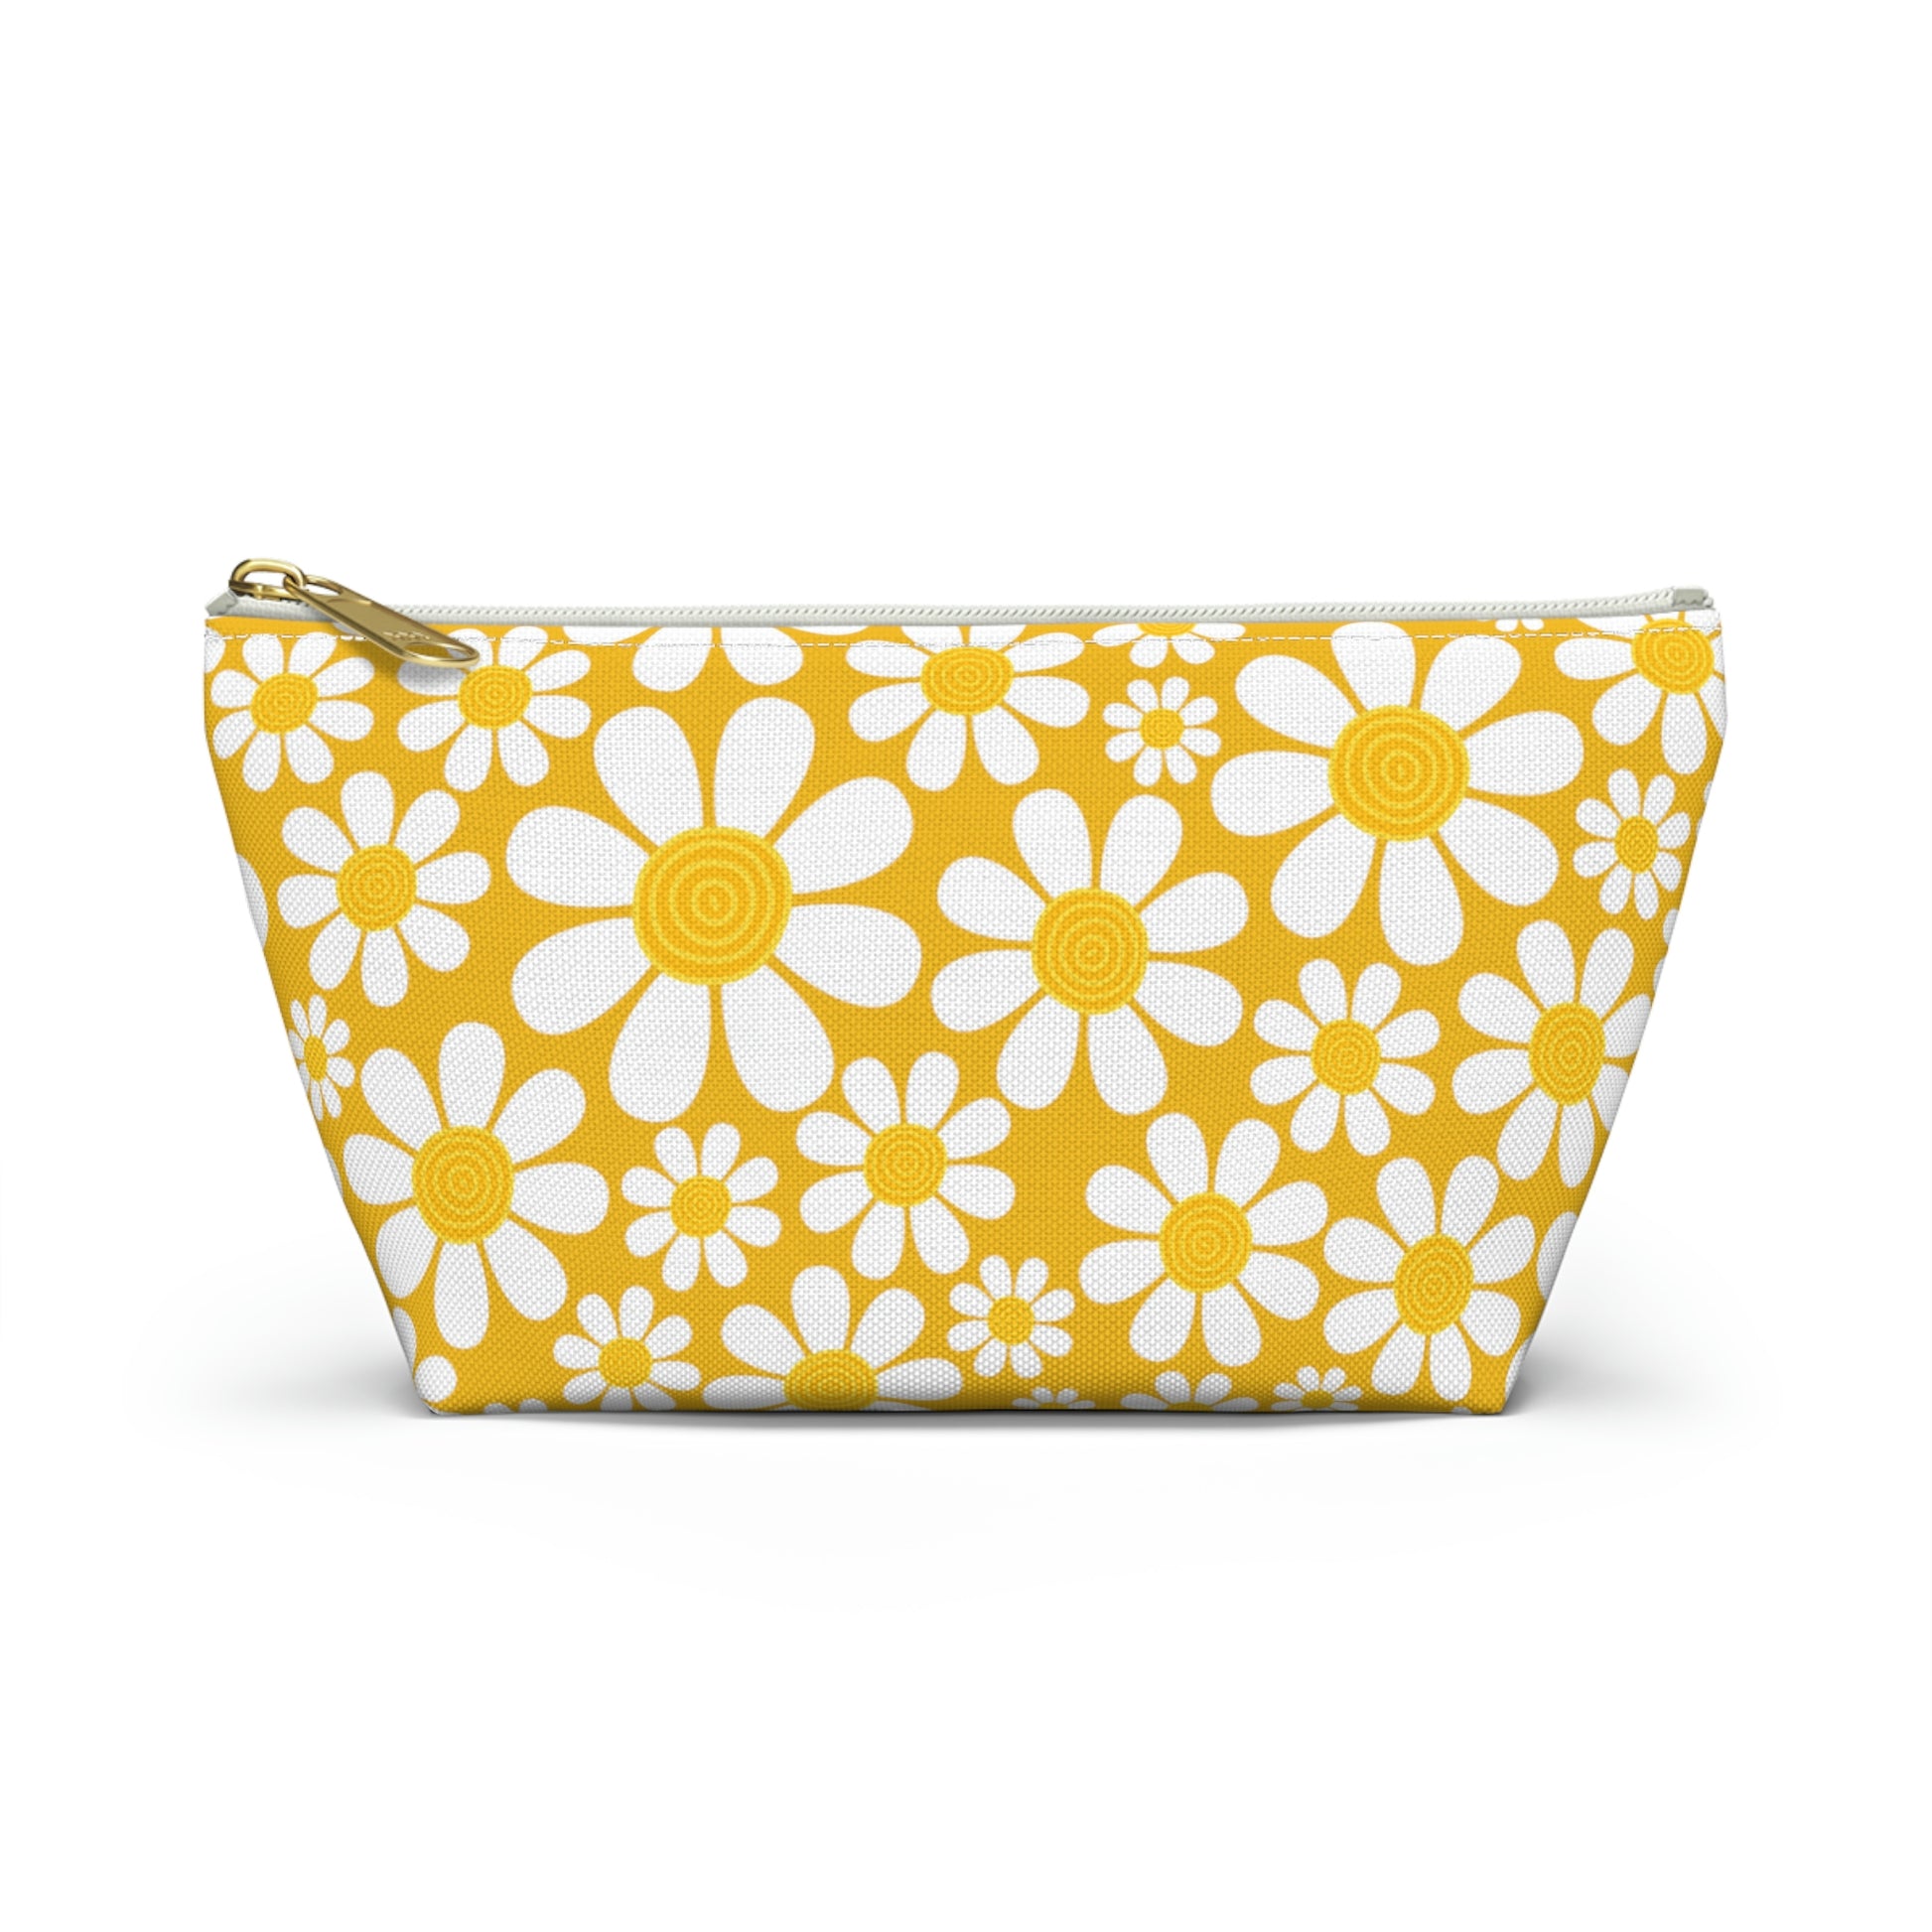 yellow makeup bag or pencil case with white daisy print in retro style